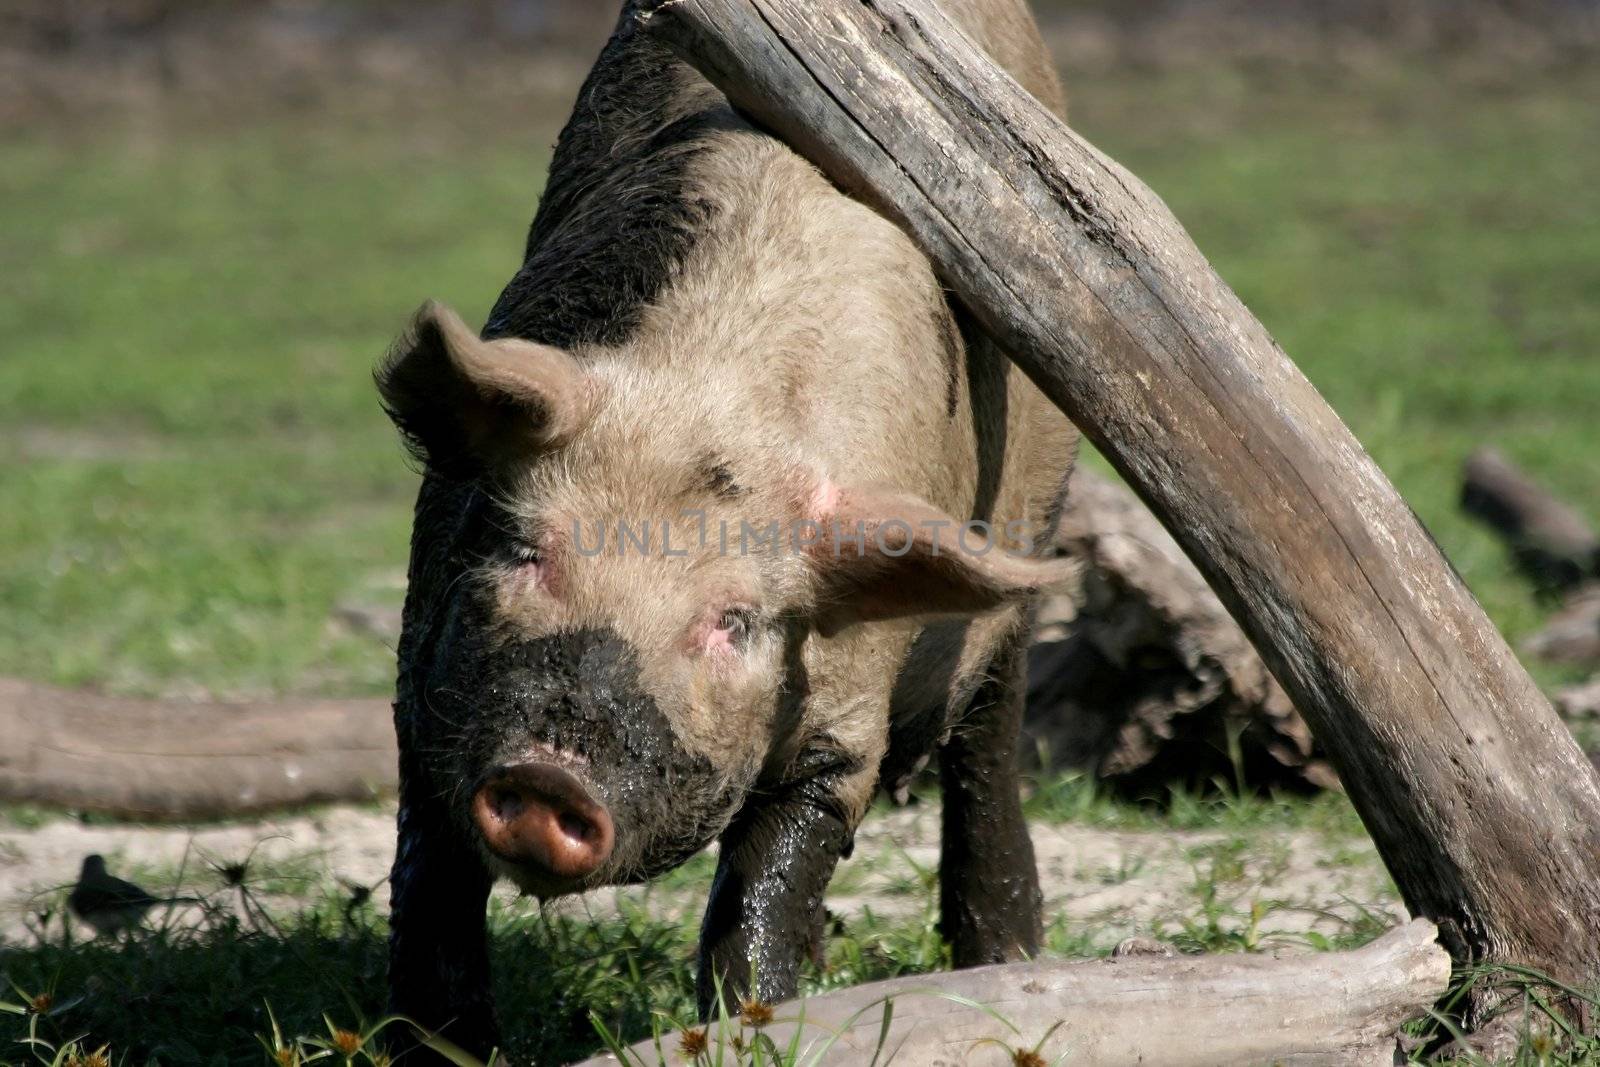 Dirty and muddy pig scratching itself on a tree stump